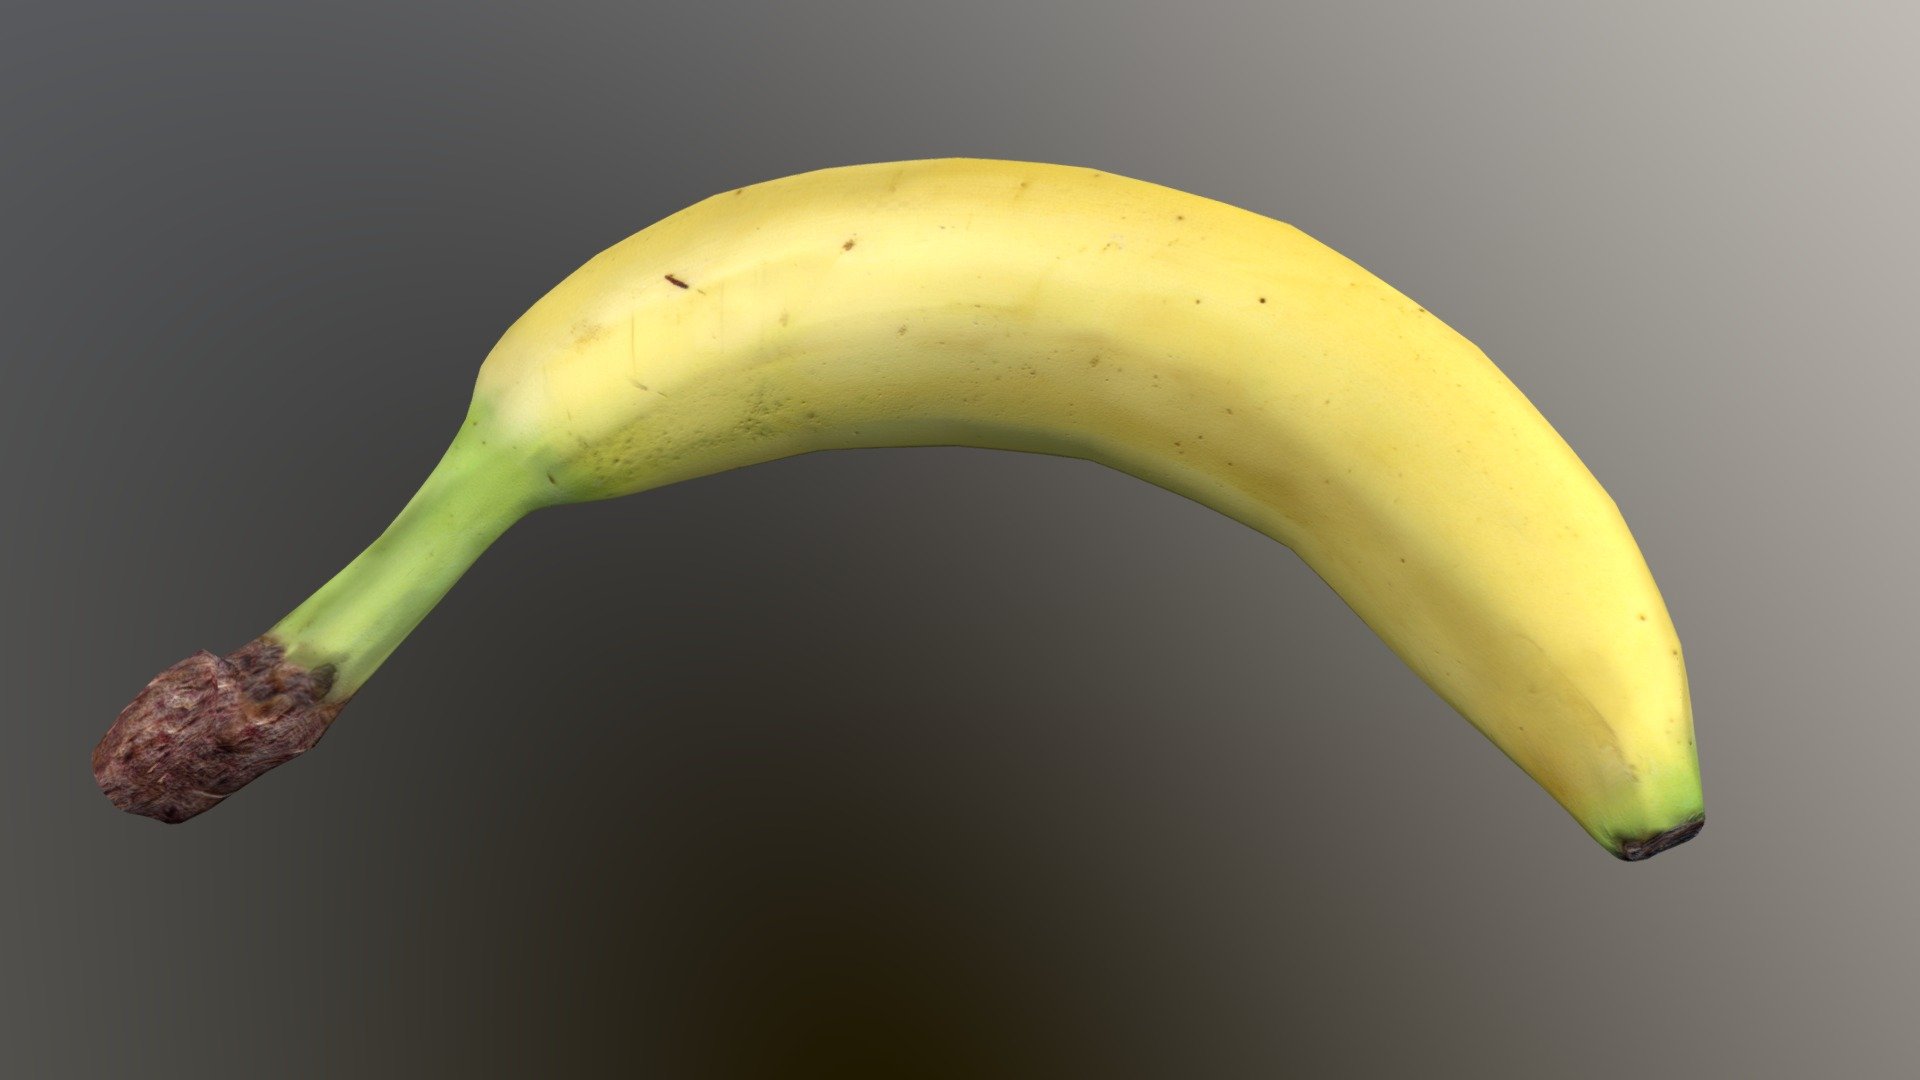 Banana 3d modeled and texture painted in Blender 3d model